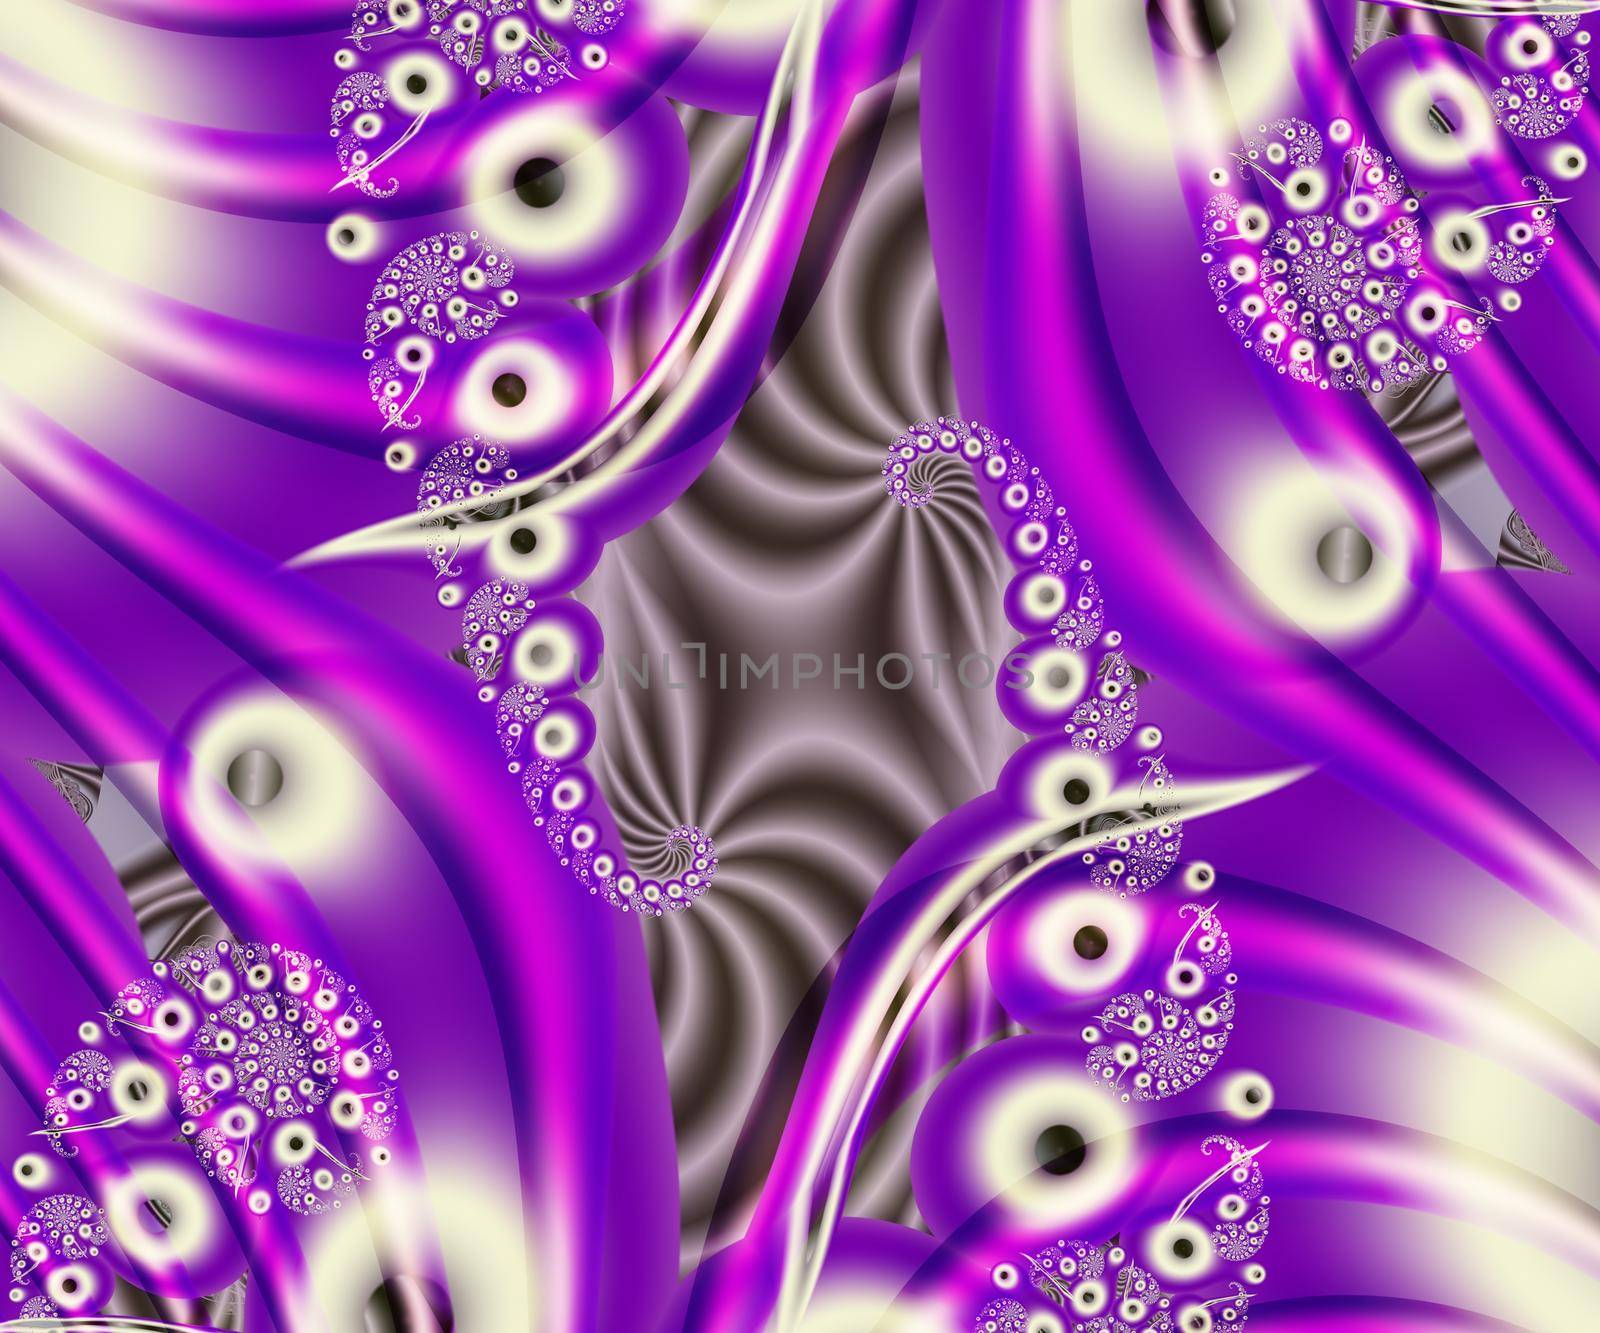 Computer generated abstract colorful fractal artwork by stocklady